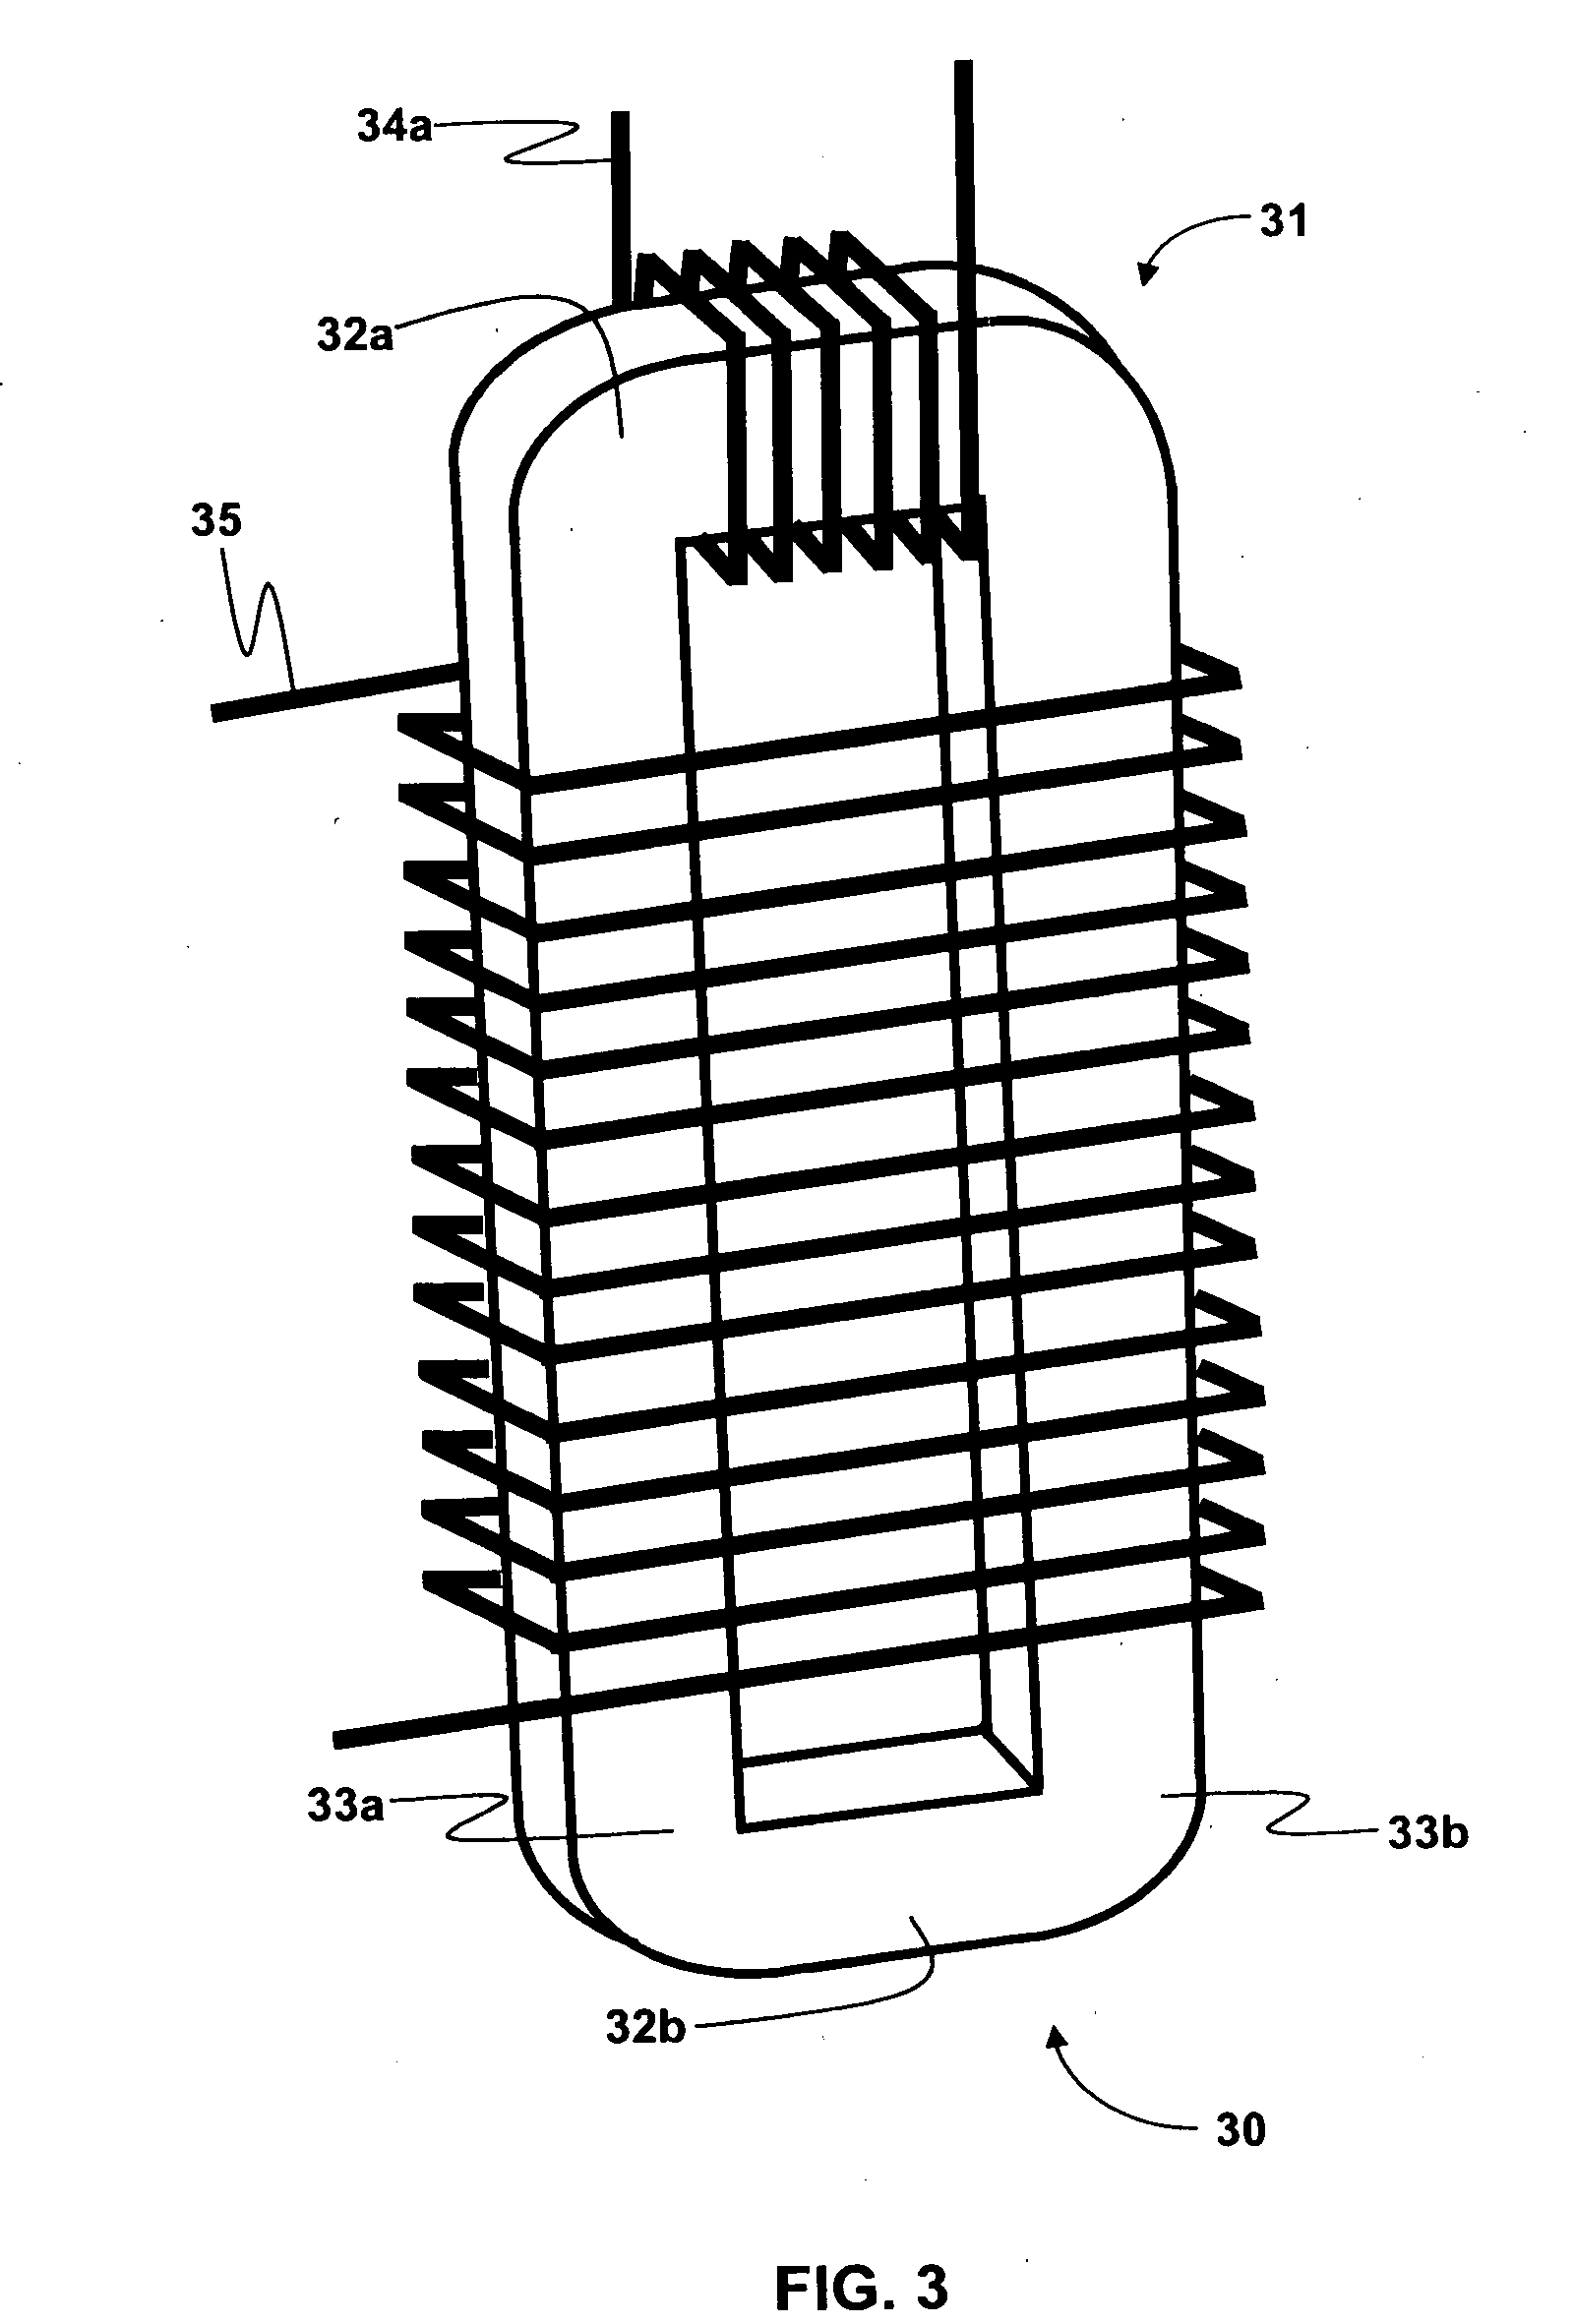 Fault current limiters (FCL) with the cores saturated by non-superconducting coils